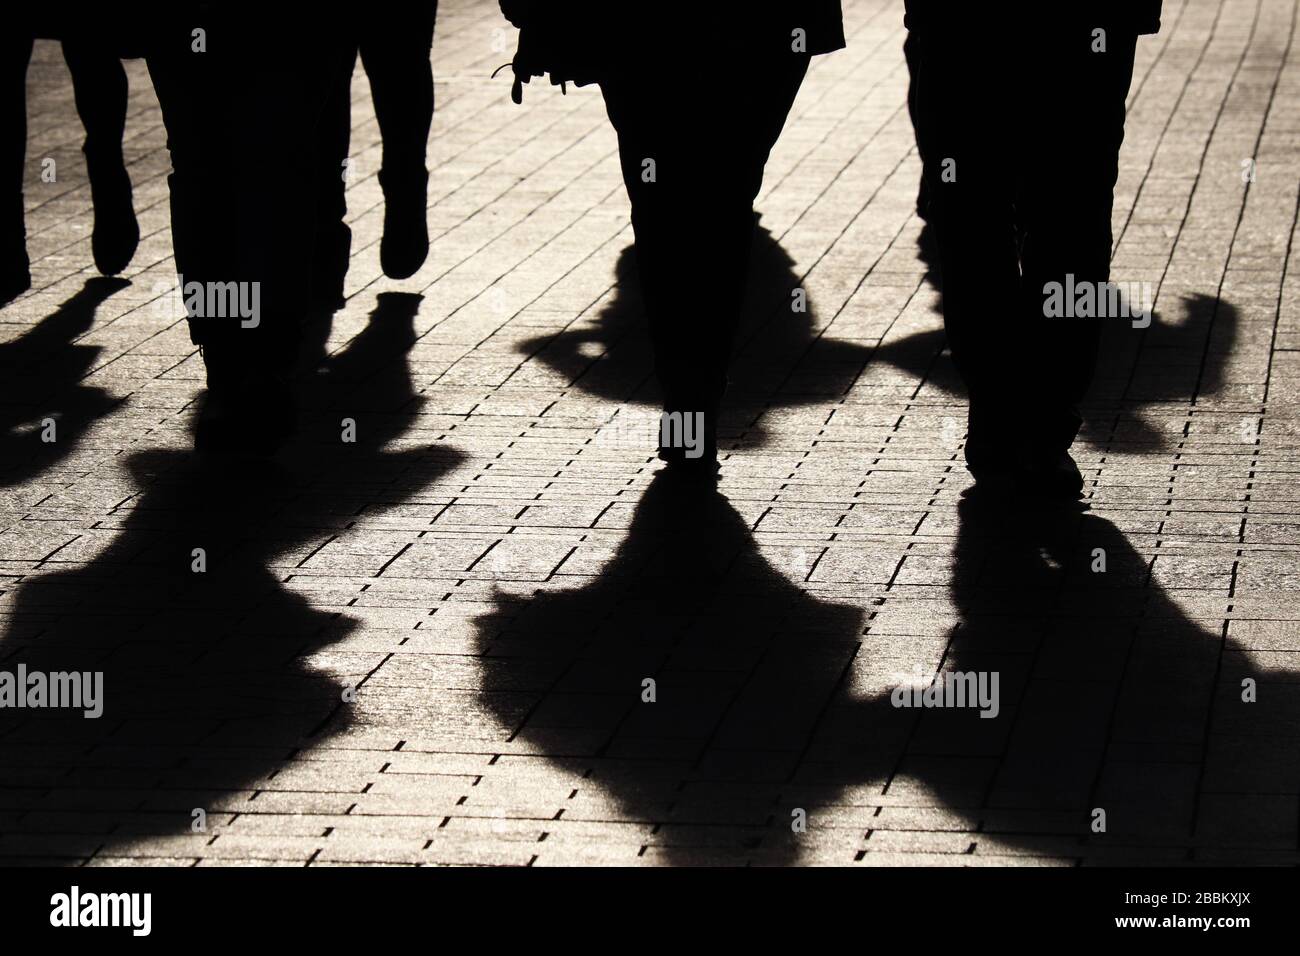 Silhouettes and shadows of people on the street. Crowd walking down on sidewalk, spread of infection during COVID-19 coronavirus pandemic, concept of Stock Photo